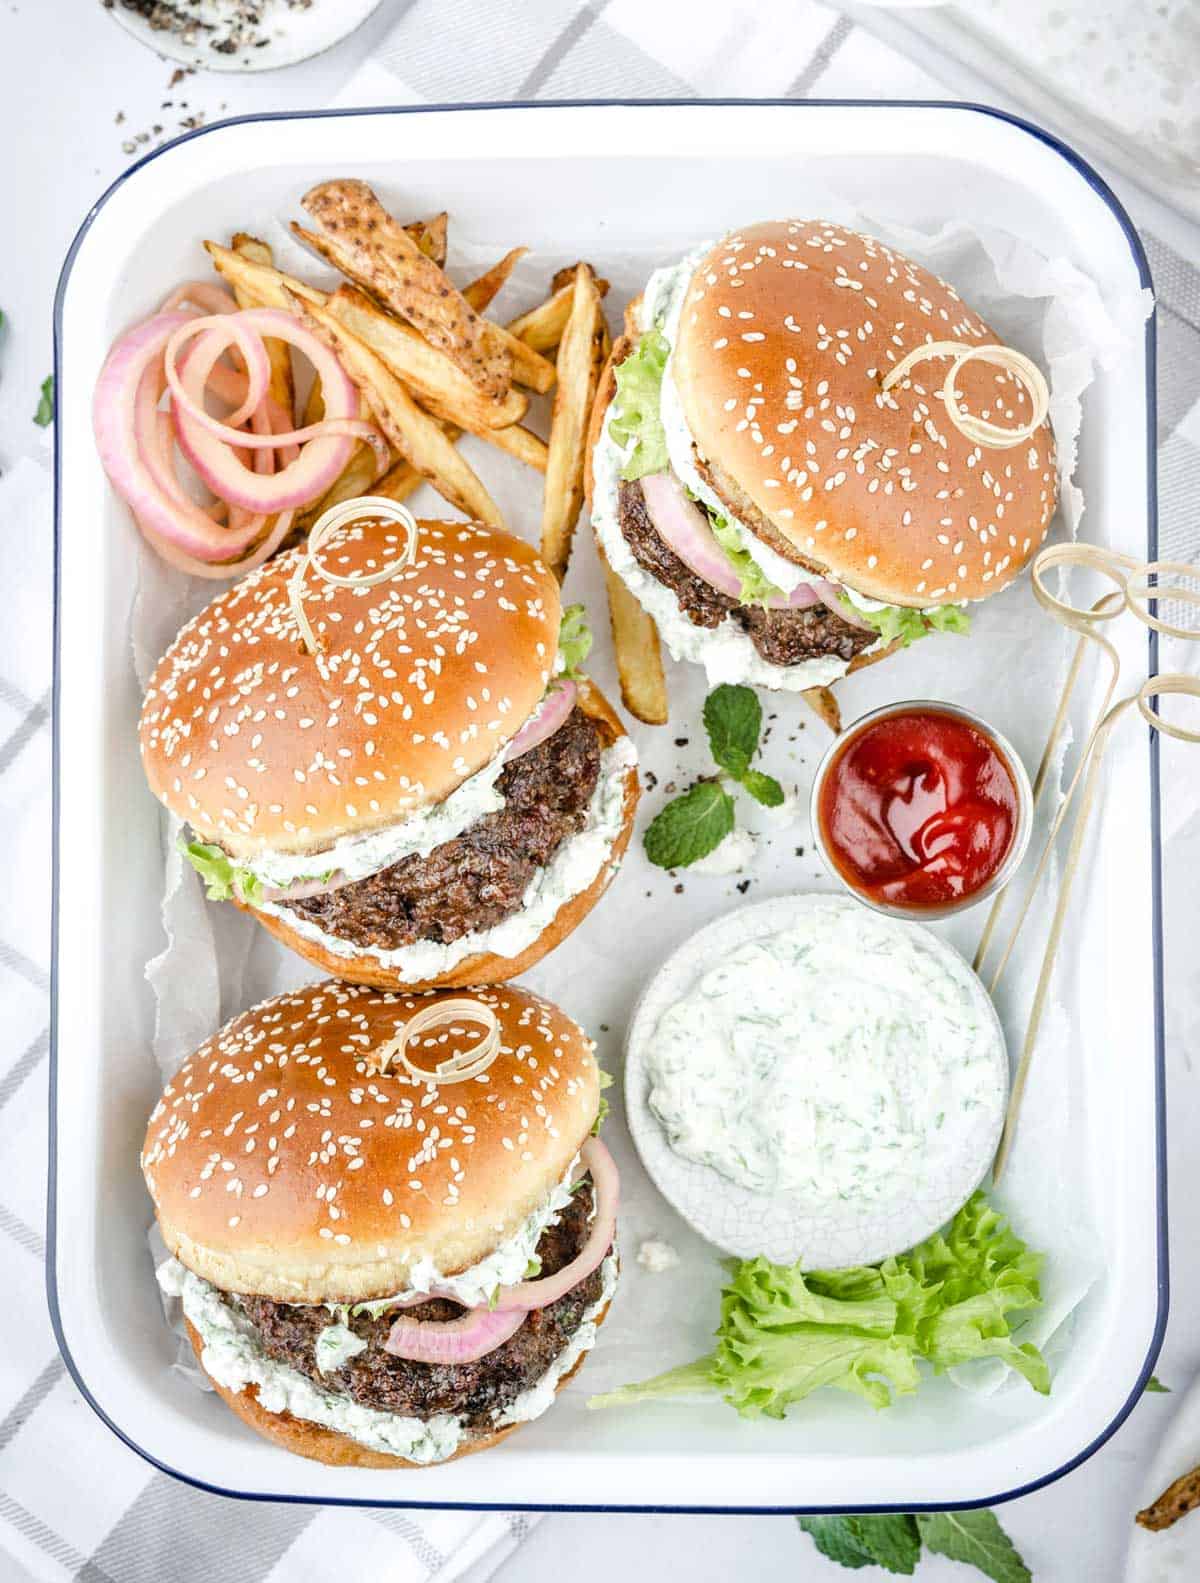 Three lamb burgers are served on a tray with French fries, tzatziki sauce and ketchup